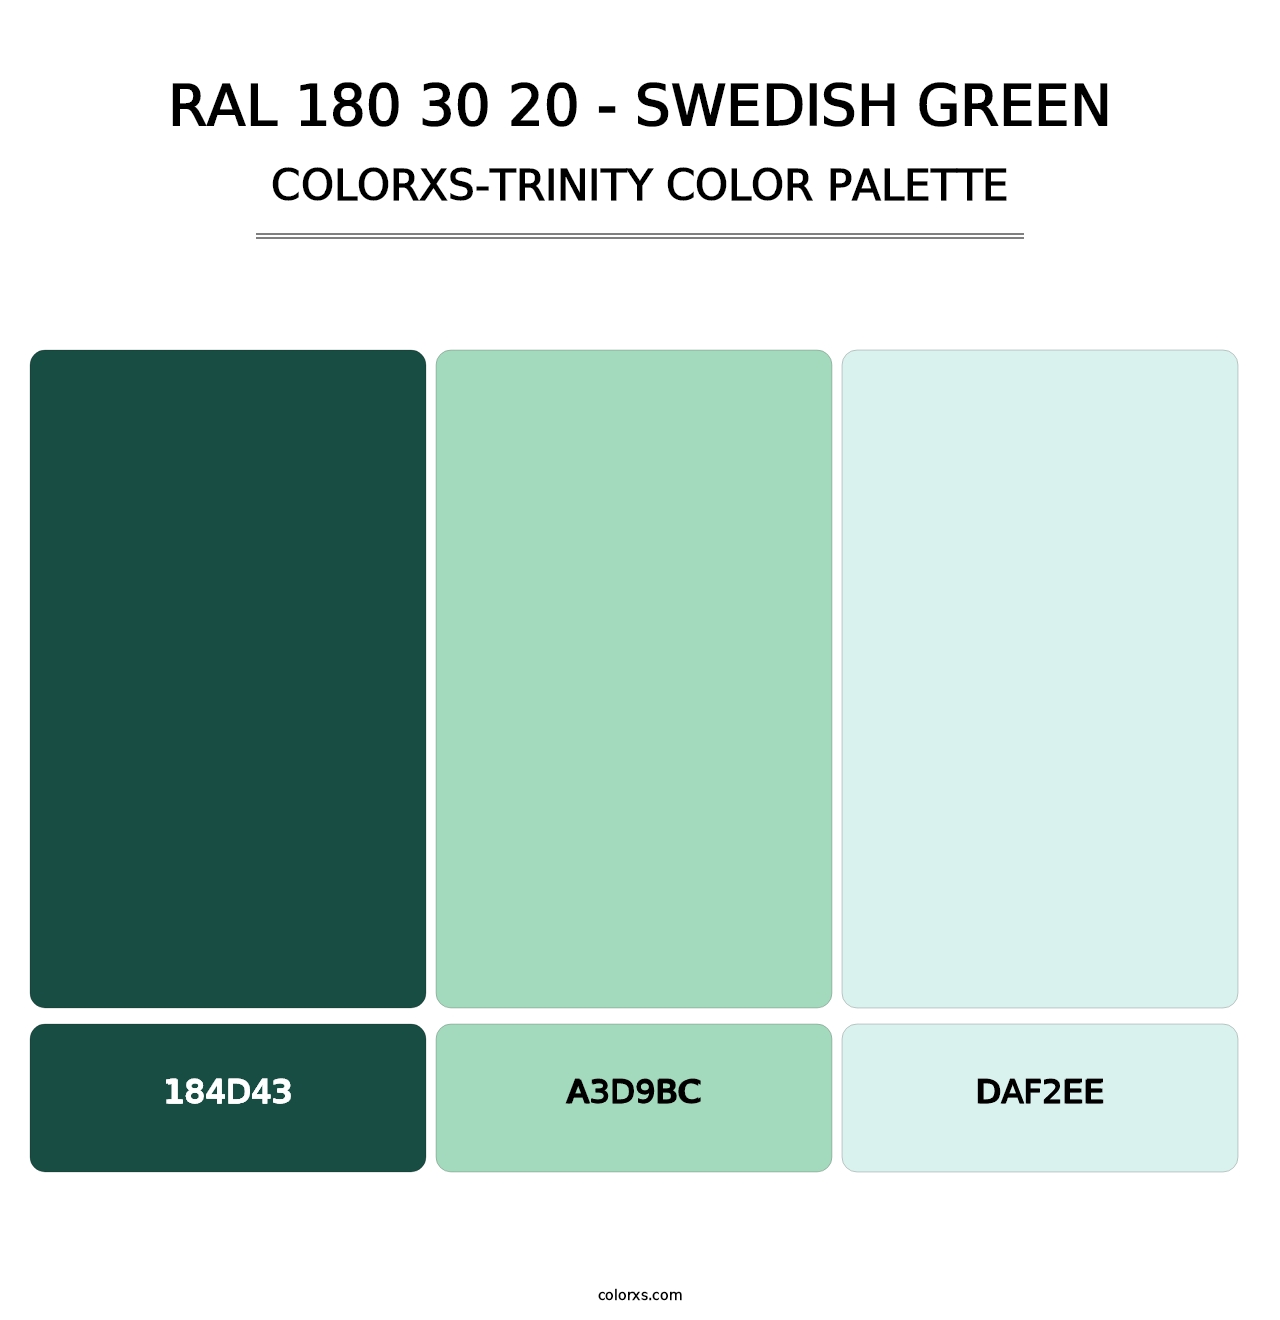 RAL 180 30 20 - Swedish Green - Colorxs Trinity Palette